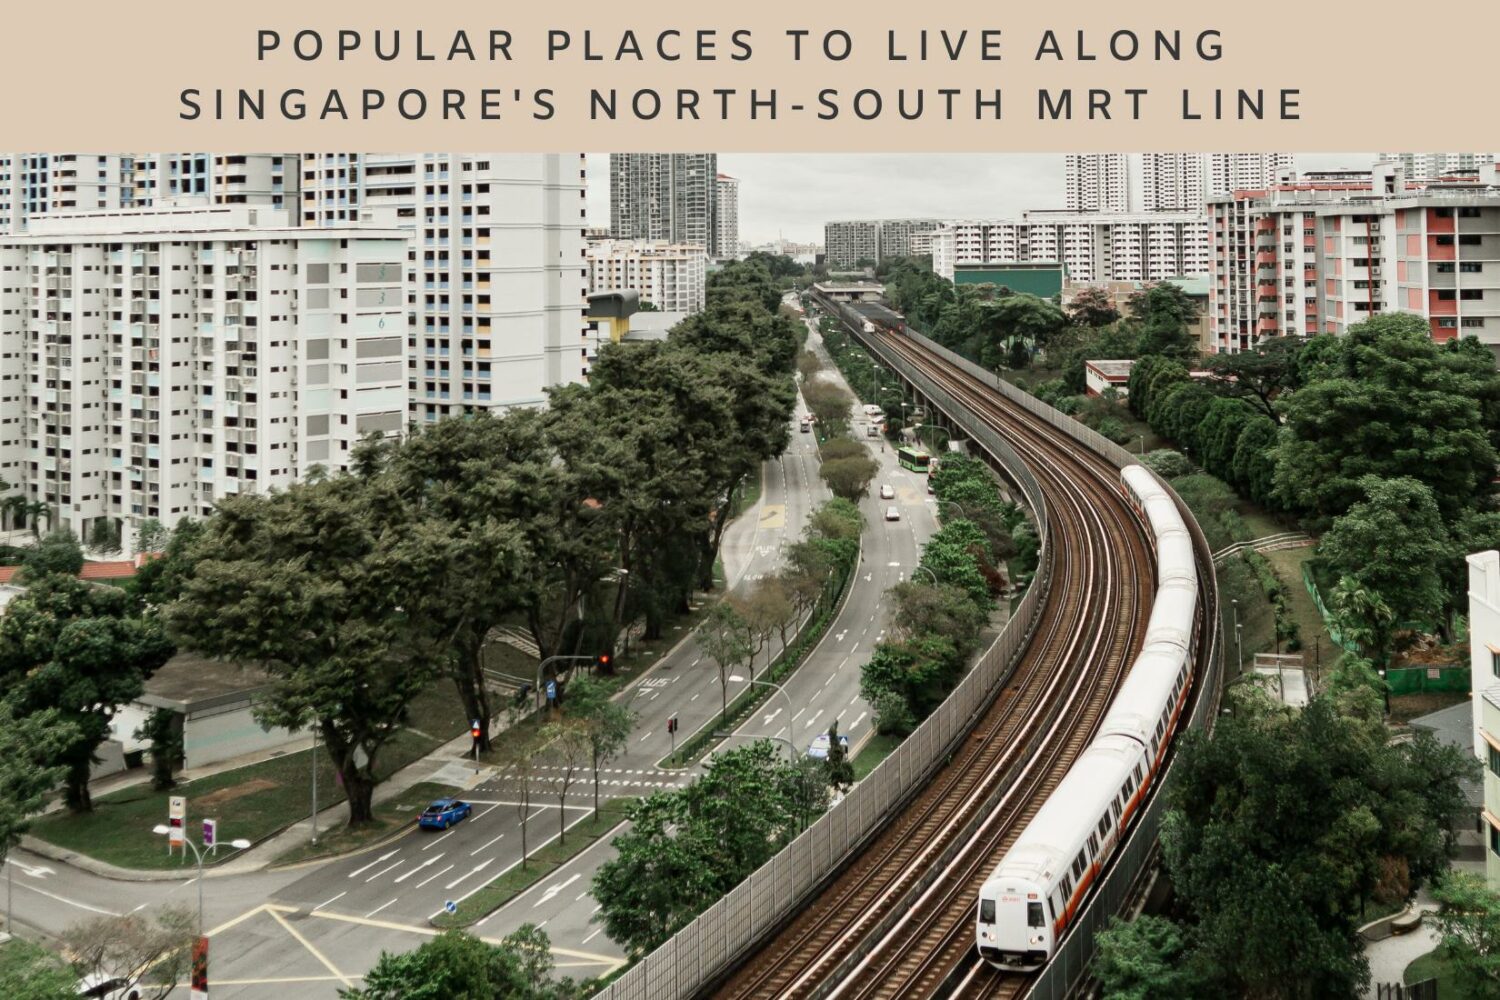 Popular Places to Live Along Singapore’s North-South MRT Line